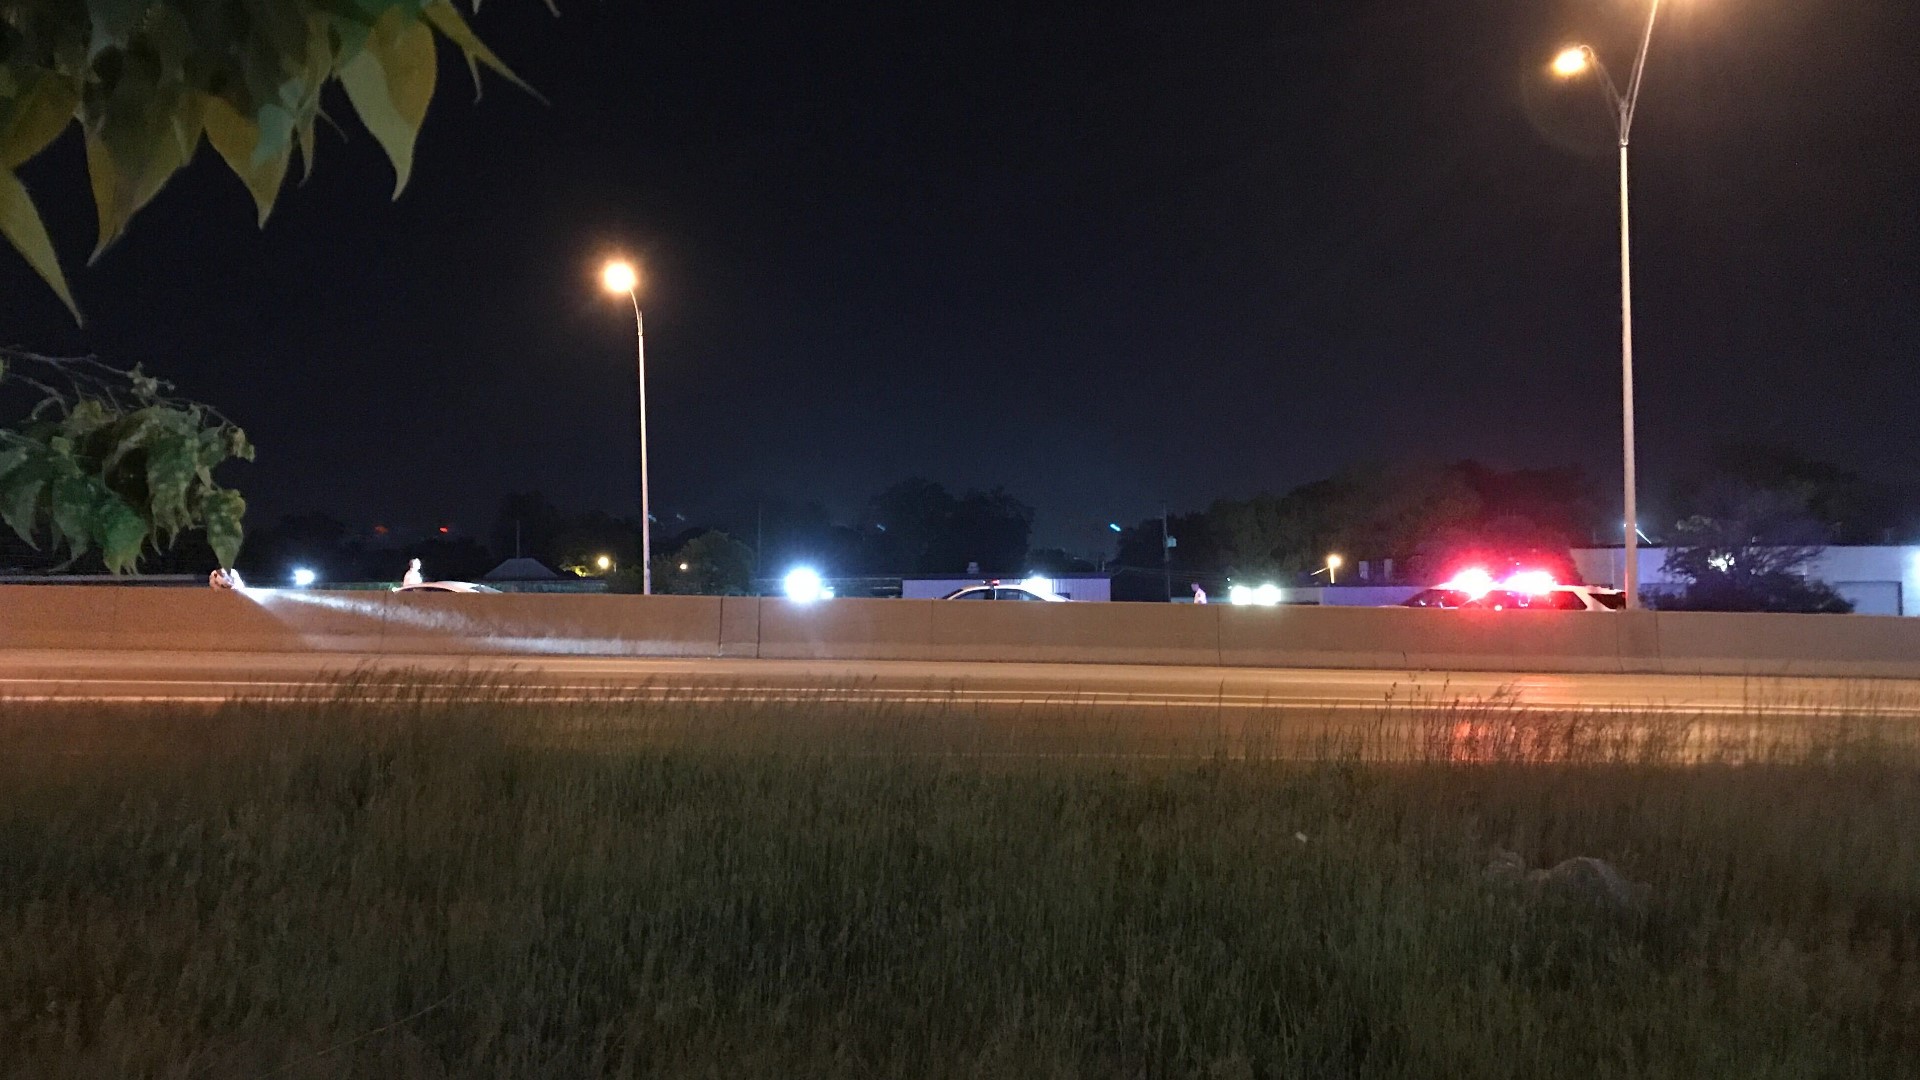 A shooting took place on Interstate 71 North and 17th Avenue early Wednesday morning. The victim of the shooting was taken to the Ohio State University Hospital.